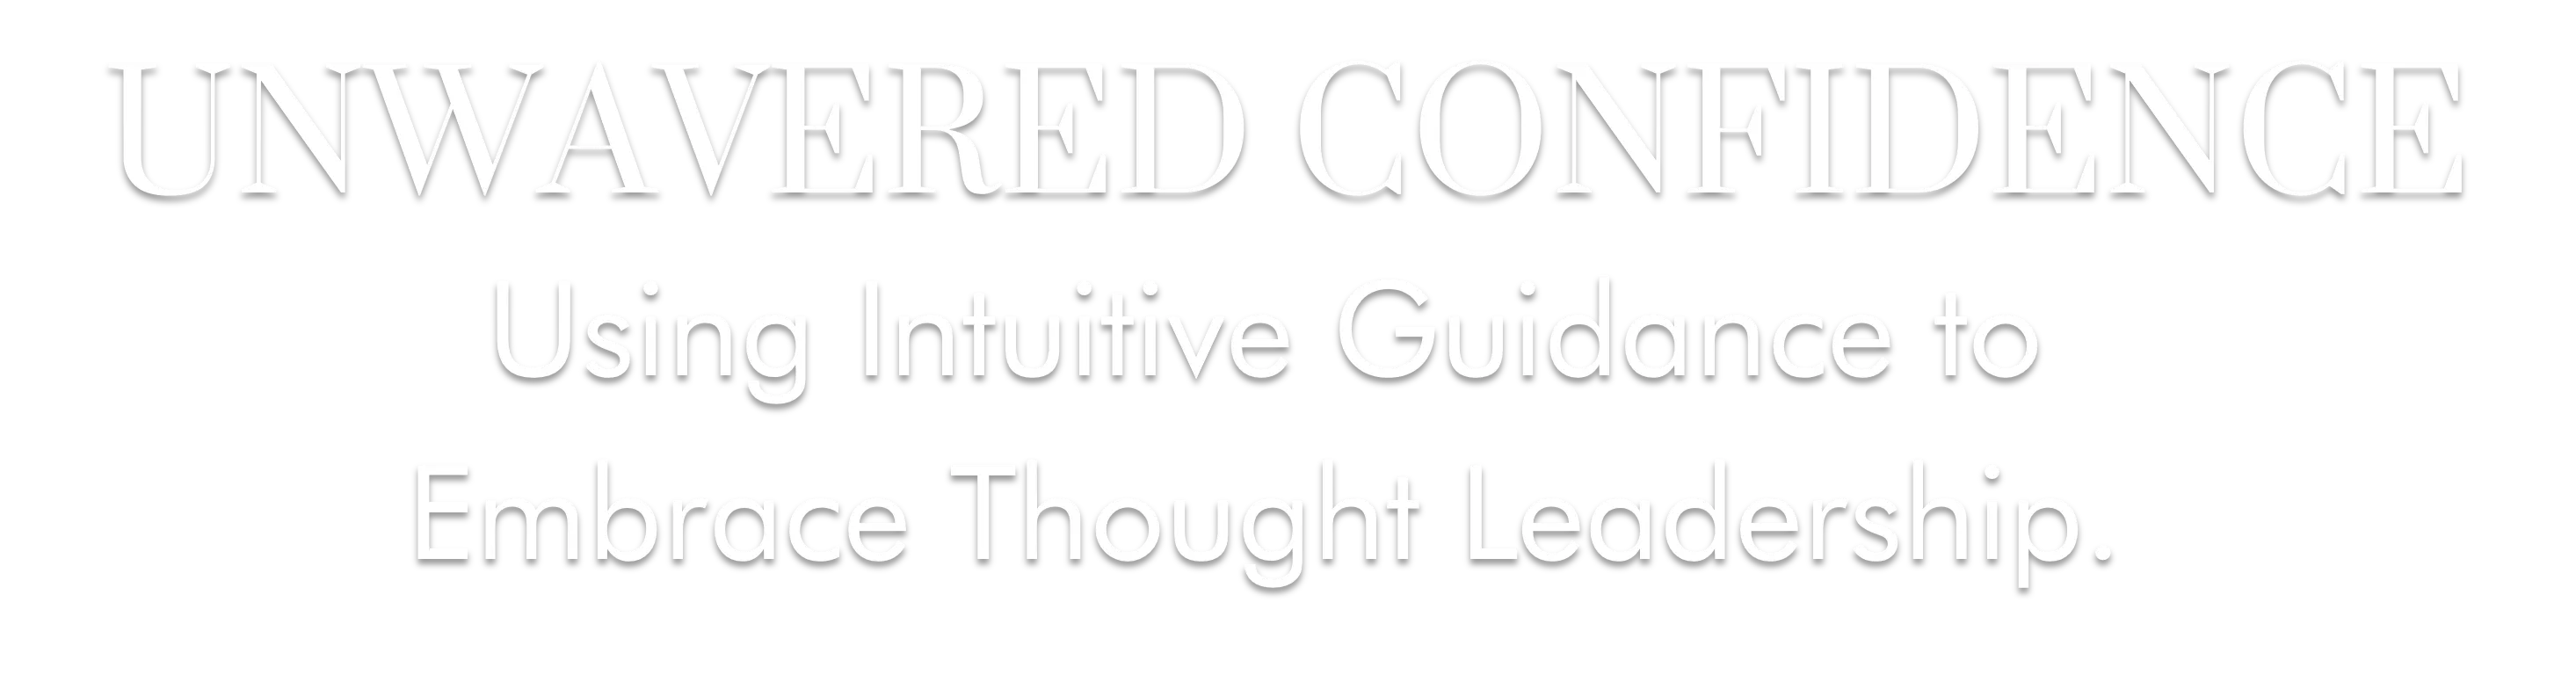 UNWAVERED CONFIDENCE Using Intuitive Guidance to Embrace Thought Leadership.